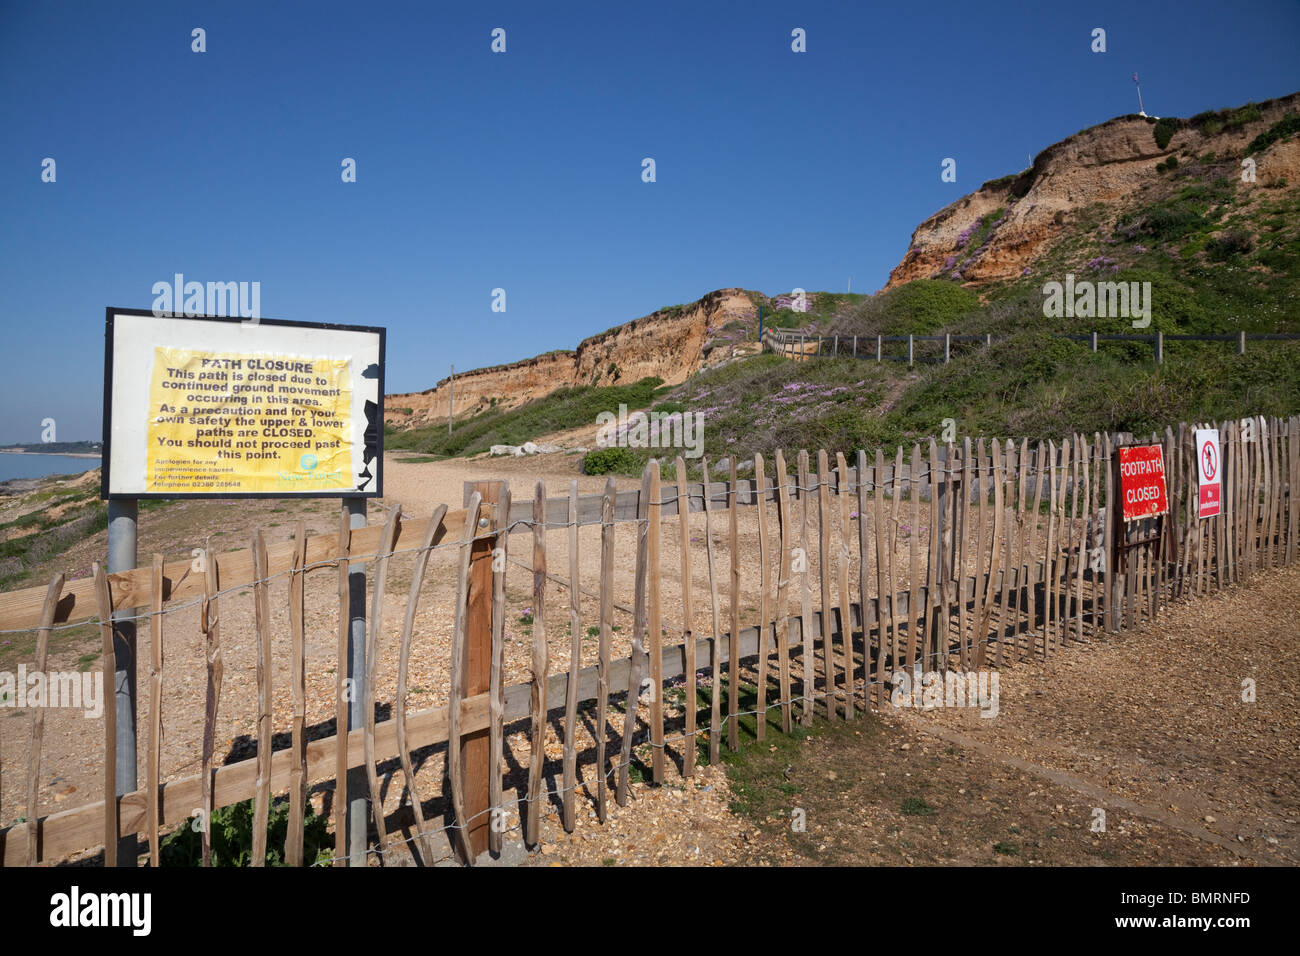 under cliff path closed sign and fencing due to ground movement erosion at Barton on Sea Stock Photo